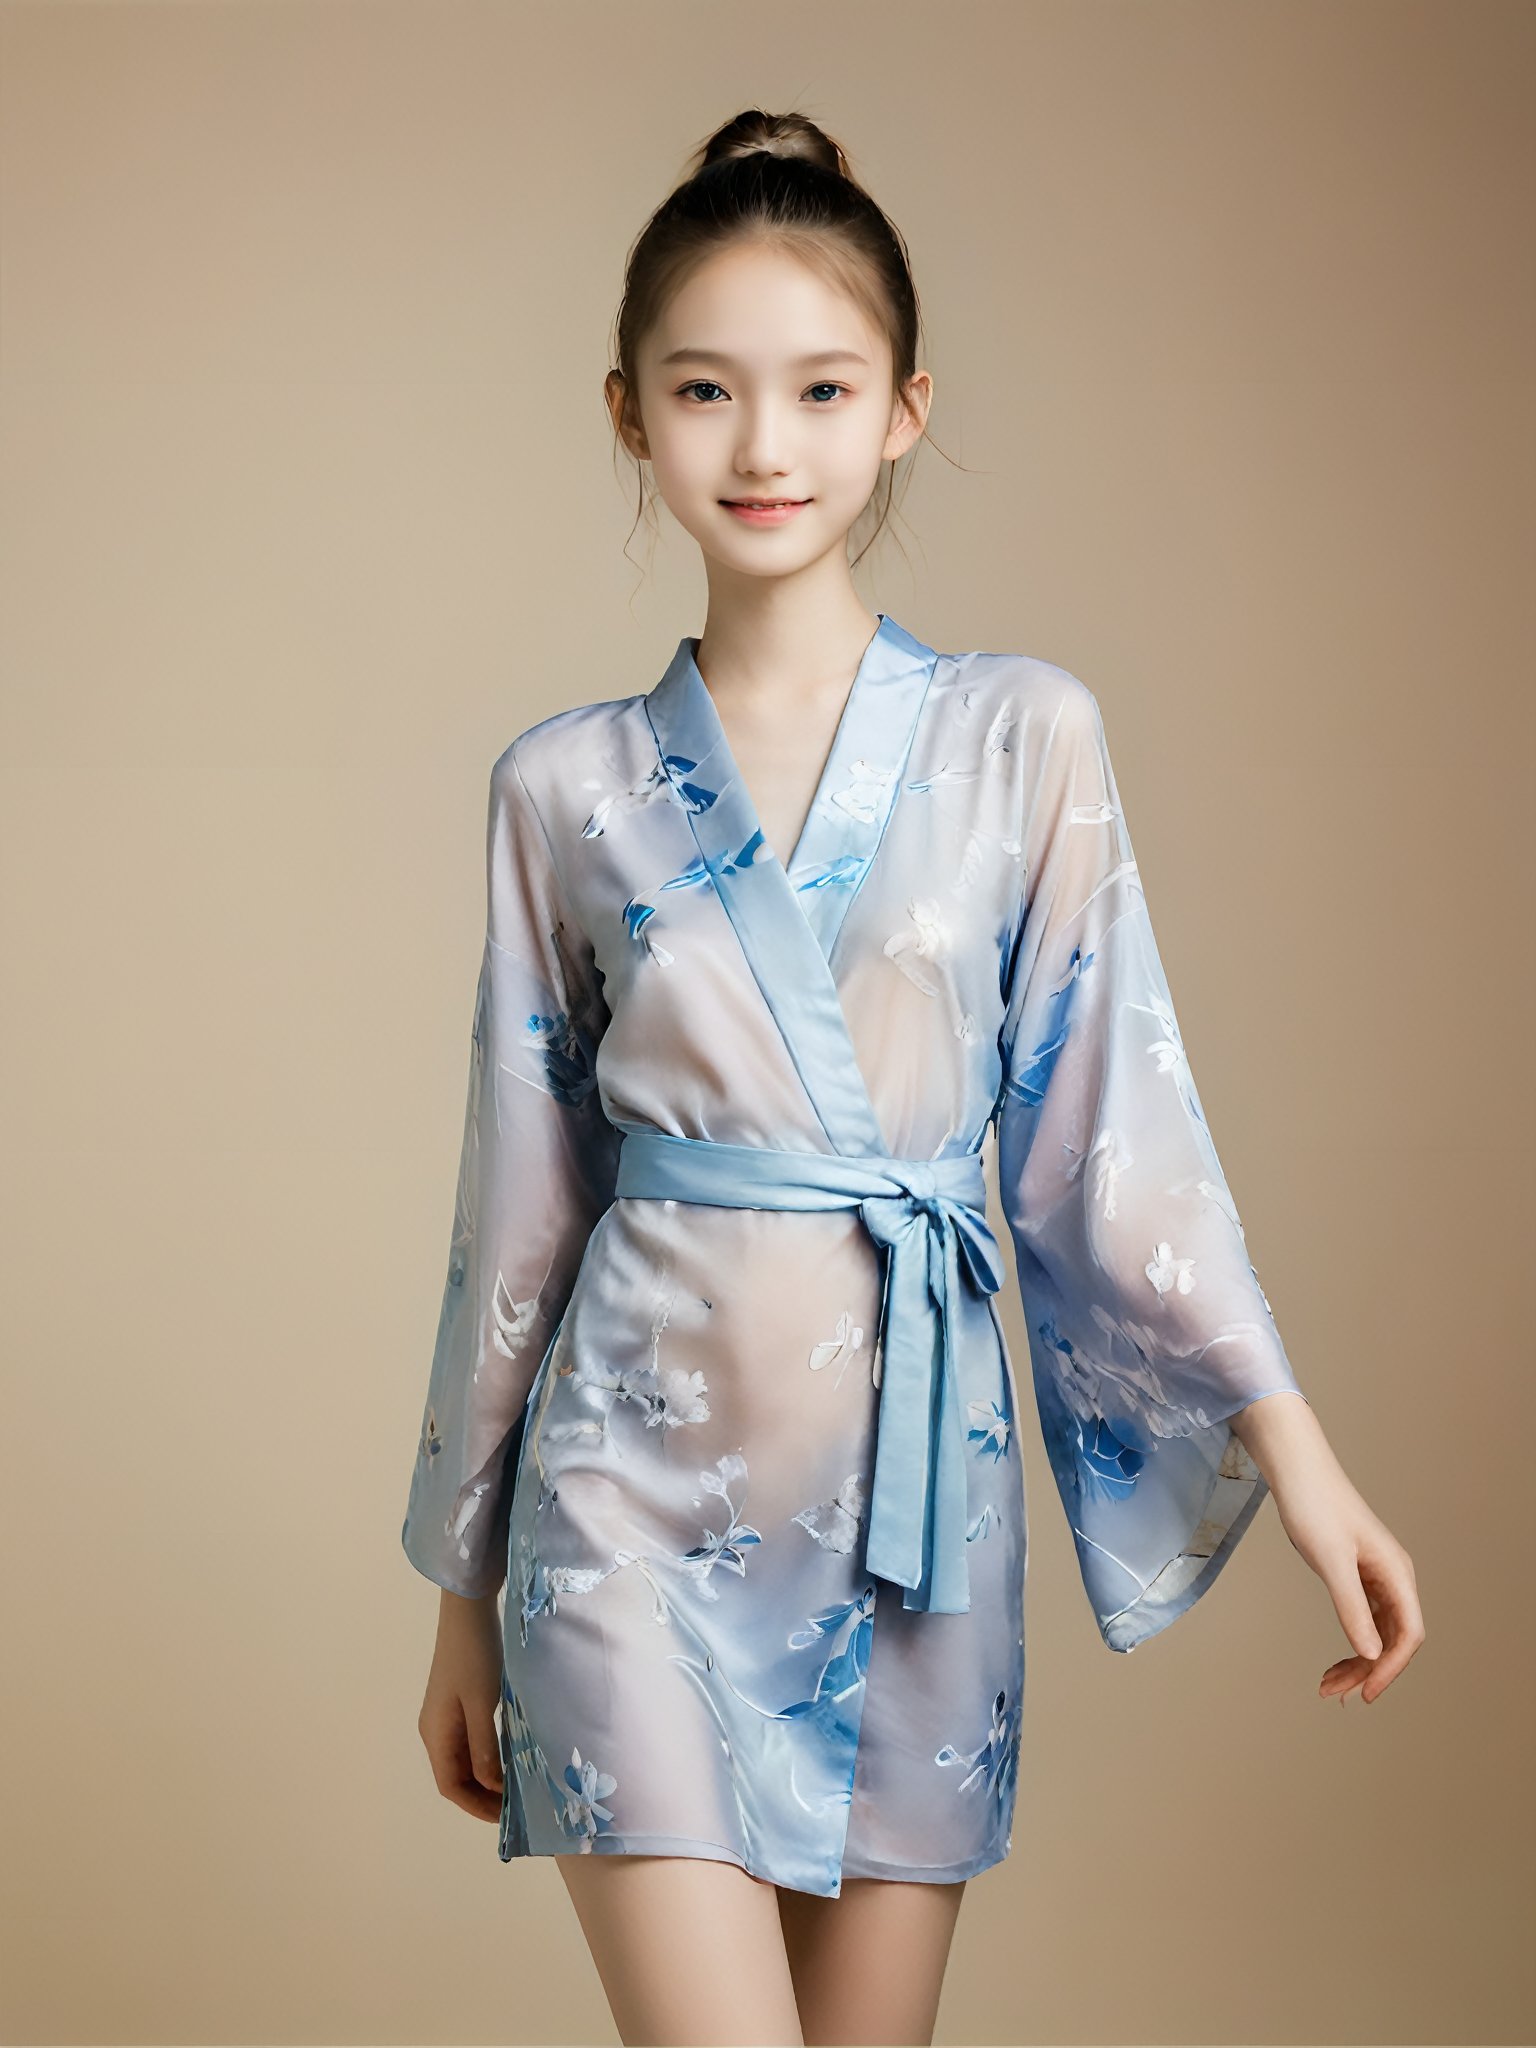 A photorealistic analog portrait of a young fashion model. (age 12-15, preteen girl, pretty girl:1). (nude, naked body, no public hair:1.6), (slender girl, skinny body, very thin:1.3), She has a gentle smile, light makeup, and is (wearing an erotic dropped kimono dress:1.2). (beautiful hairstyle, ponytail:1.2),(high heels, dancing:0.8), The background is soft-focused with a neutral color palette, emphasizing the subject. The lighting is soft and diffused, highlighting her features and giving the image a warm, inviting atmosphere. (blank background:1.2)

More Reasonable Details,aesthetic portrait,FilmGirl,hubggirl,more detail XL,More Reasonable Details